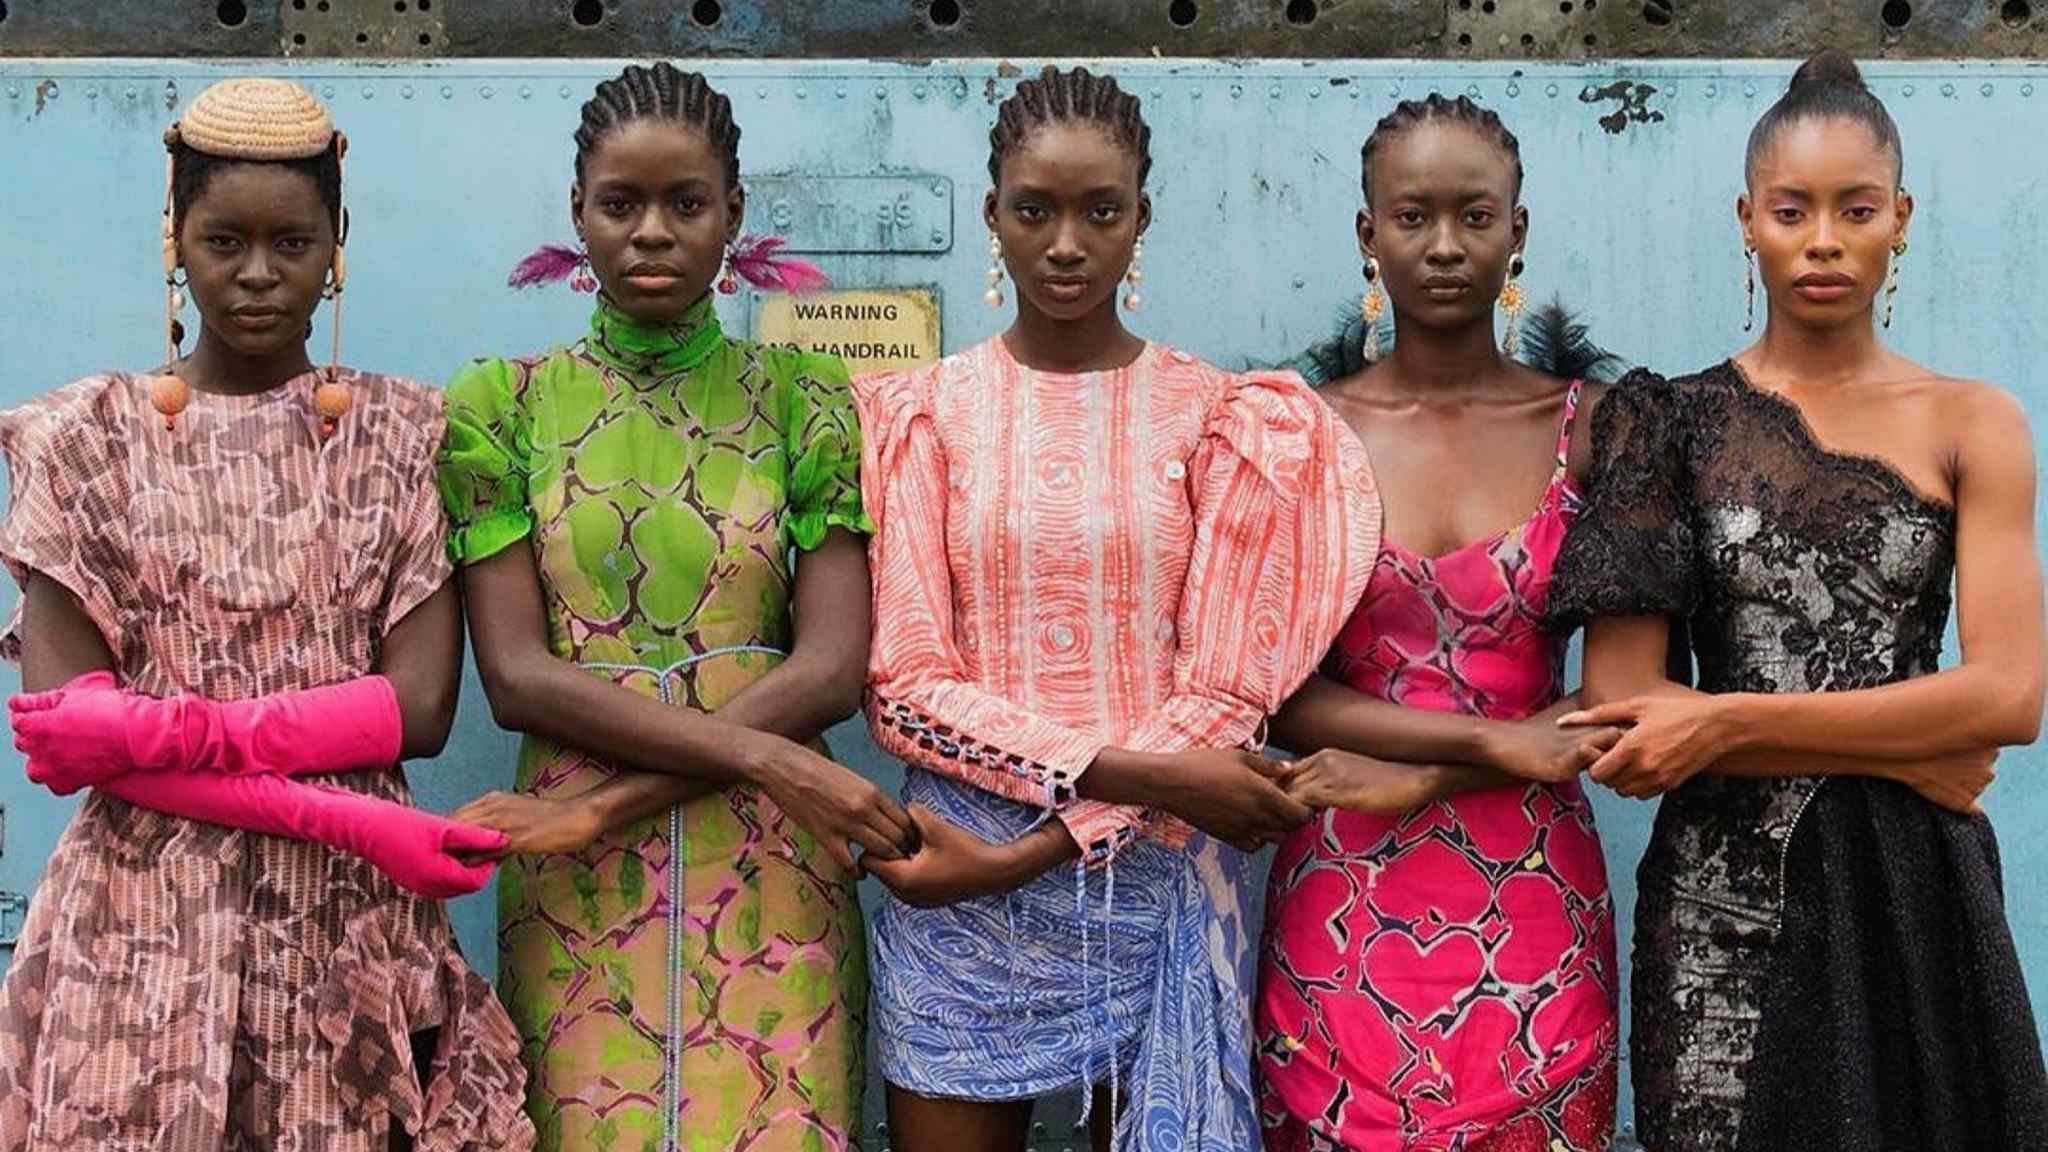 New fashion exhibition at the V&A focuses on African creativity